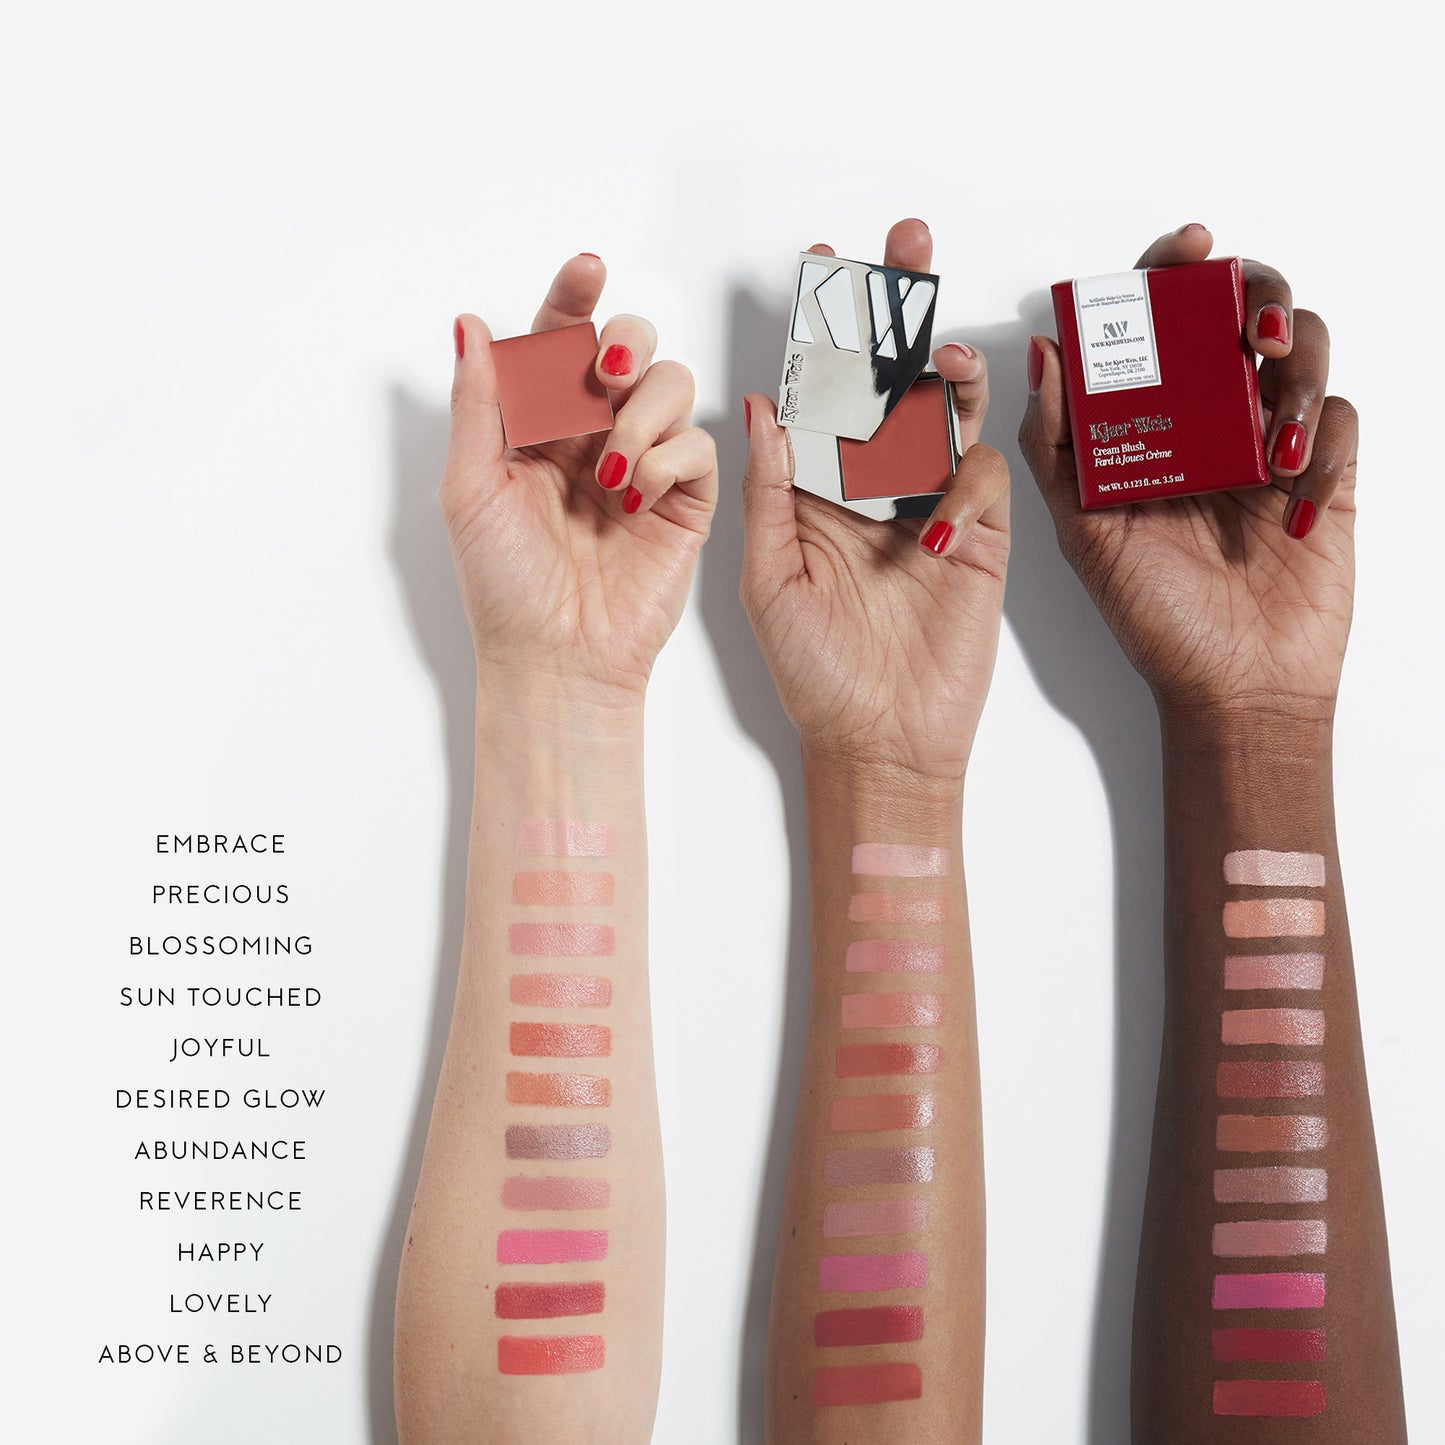 Three arms of different skin tones with swatches of different shades of lip tint